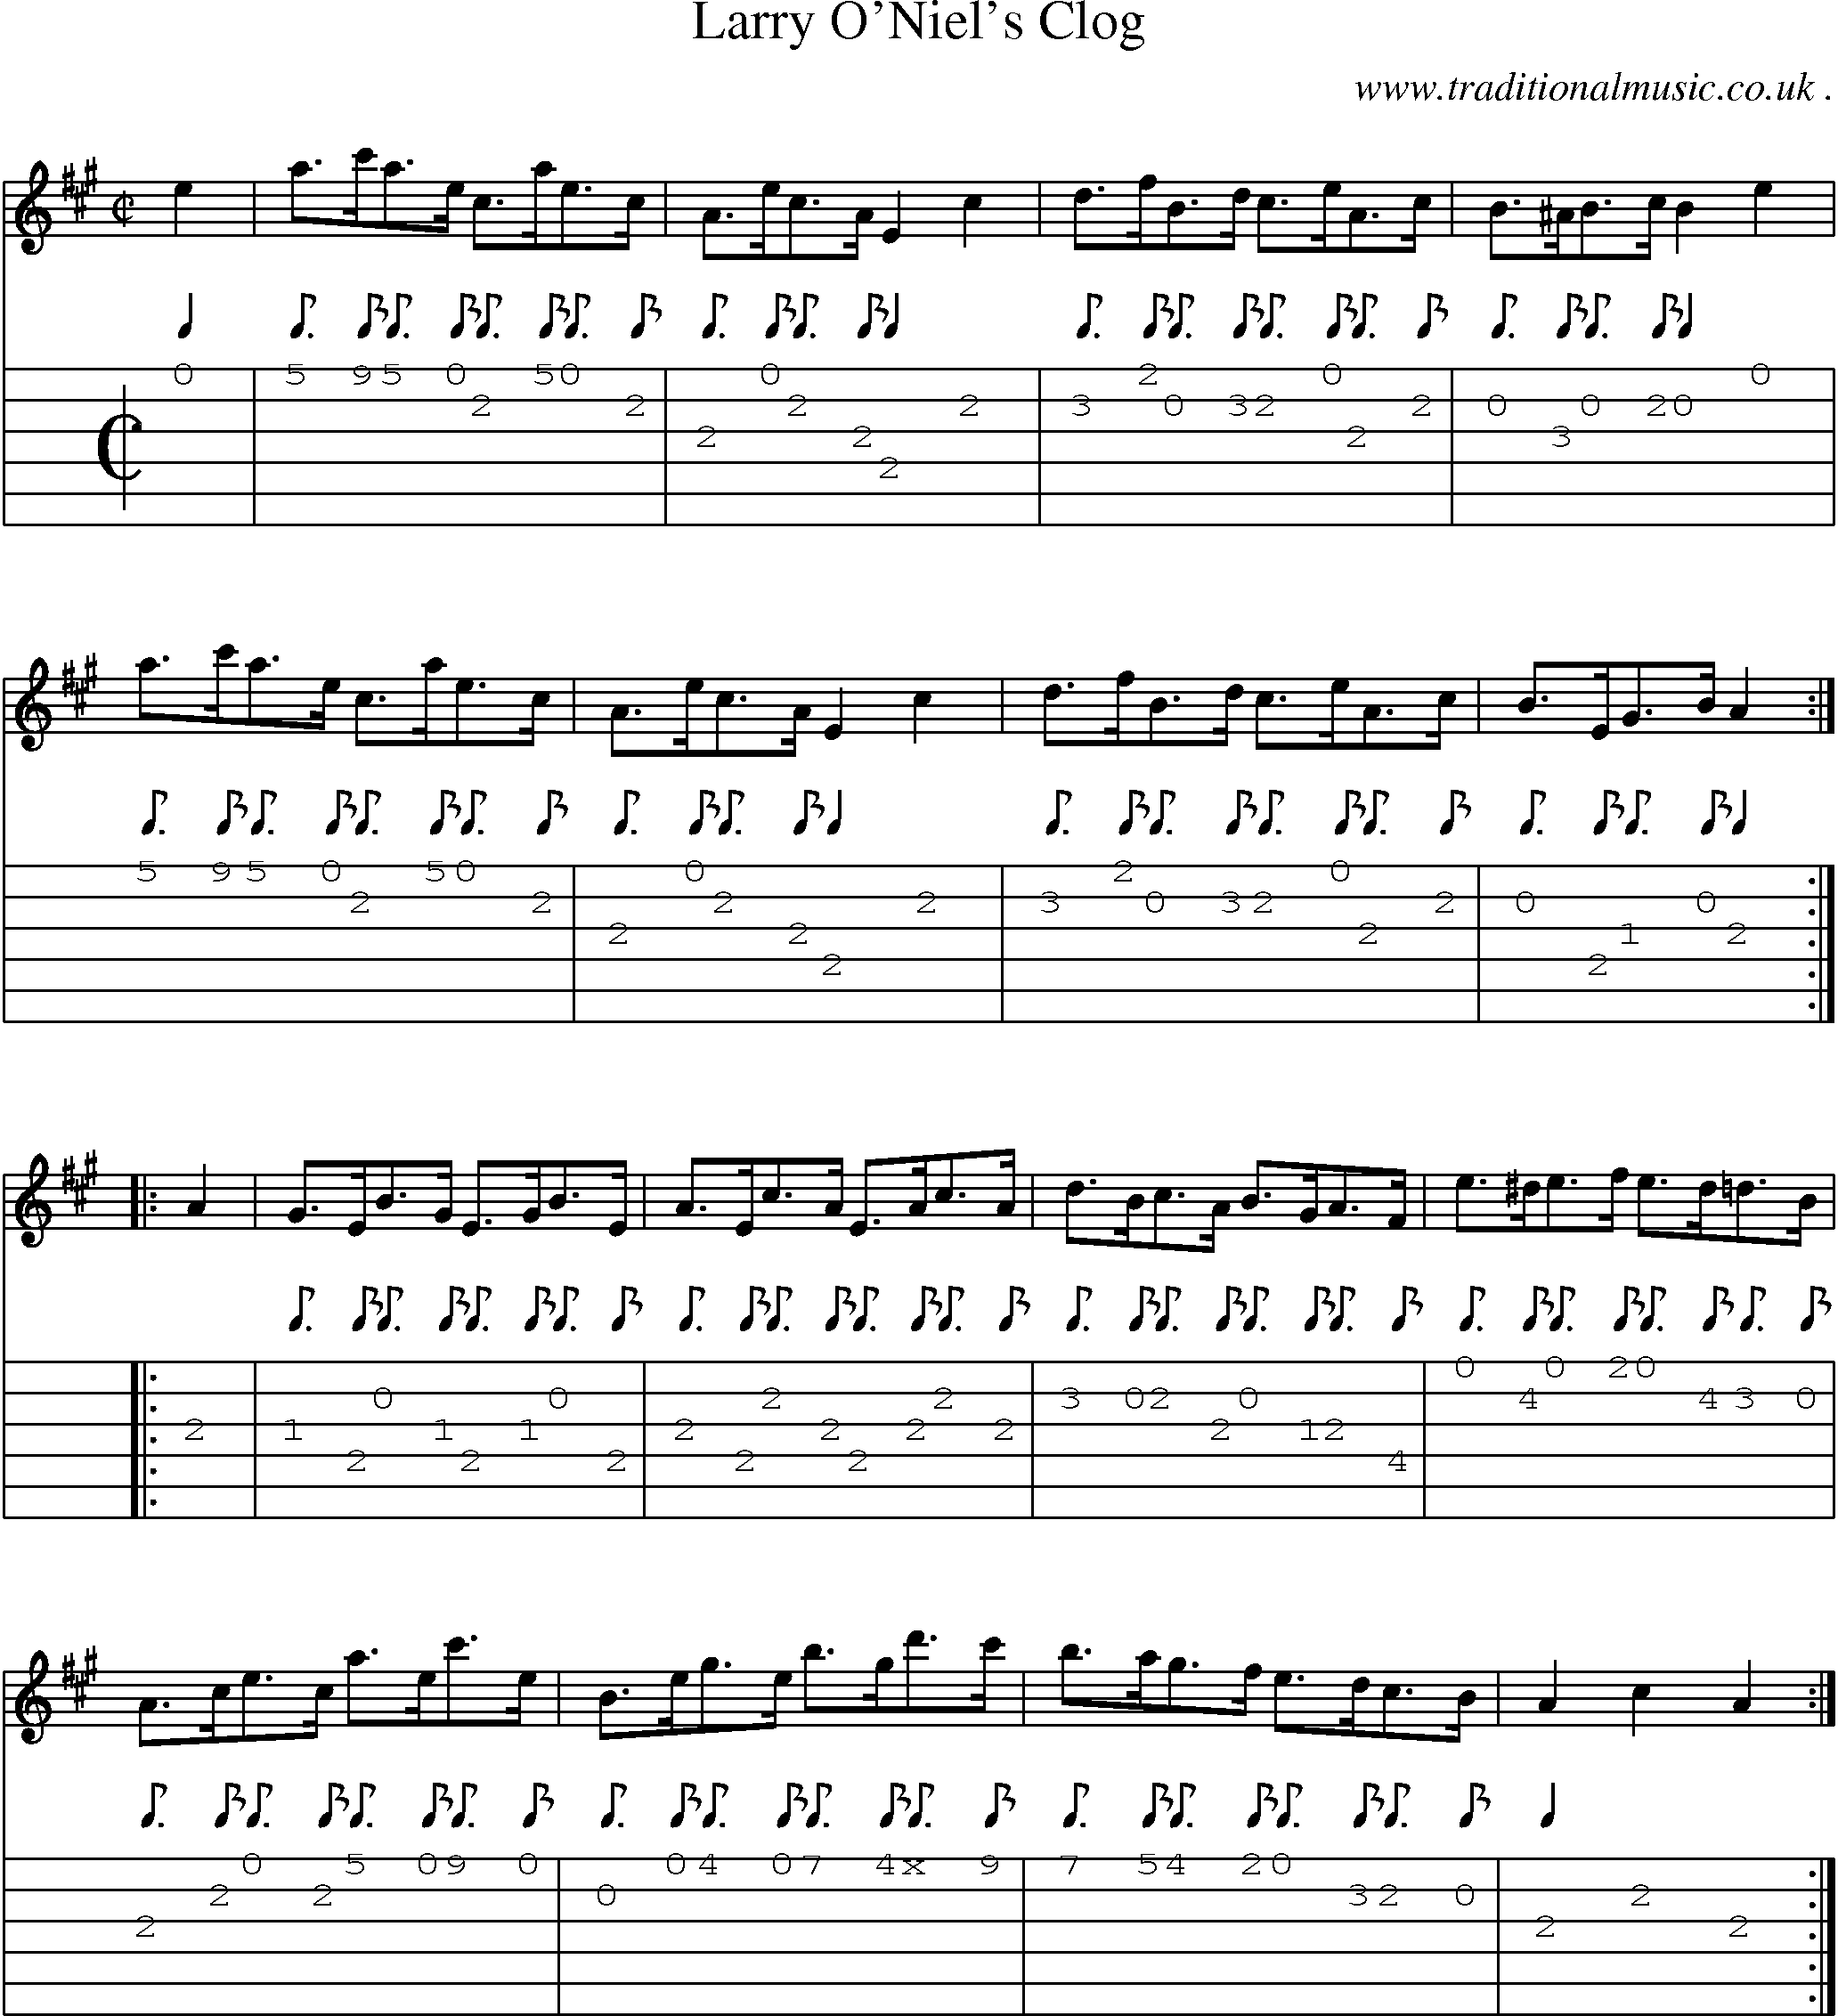 Sheet-Music and Guitar Tabs for Larry Oniels Clog